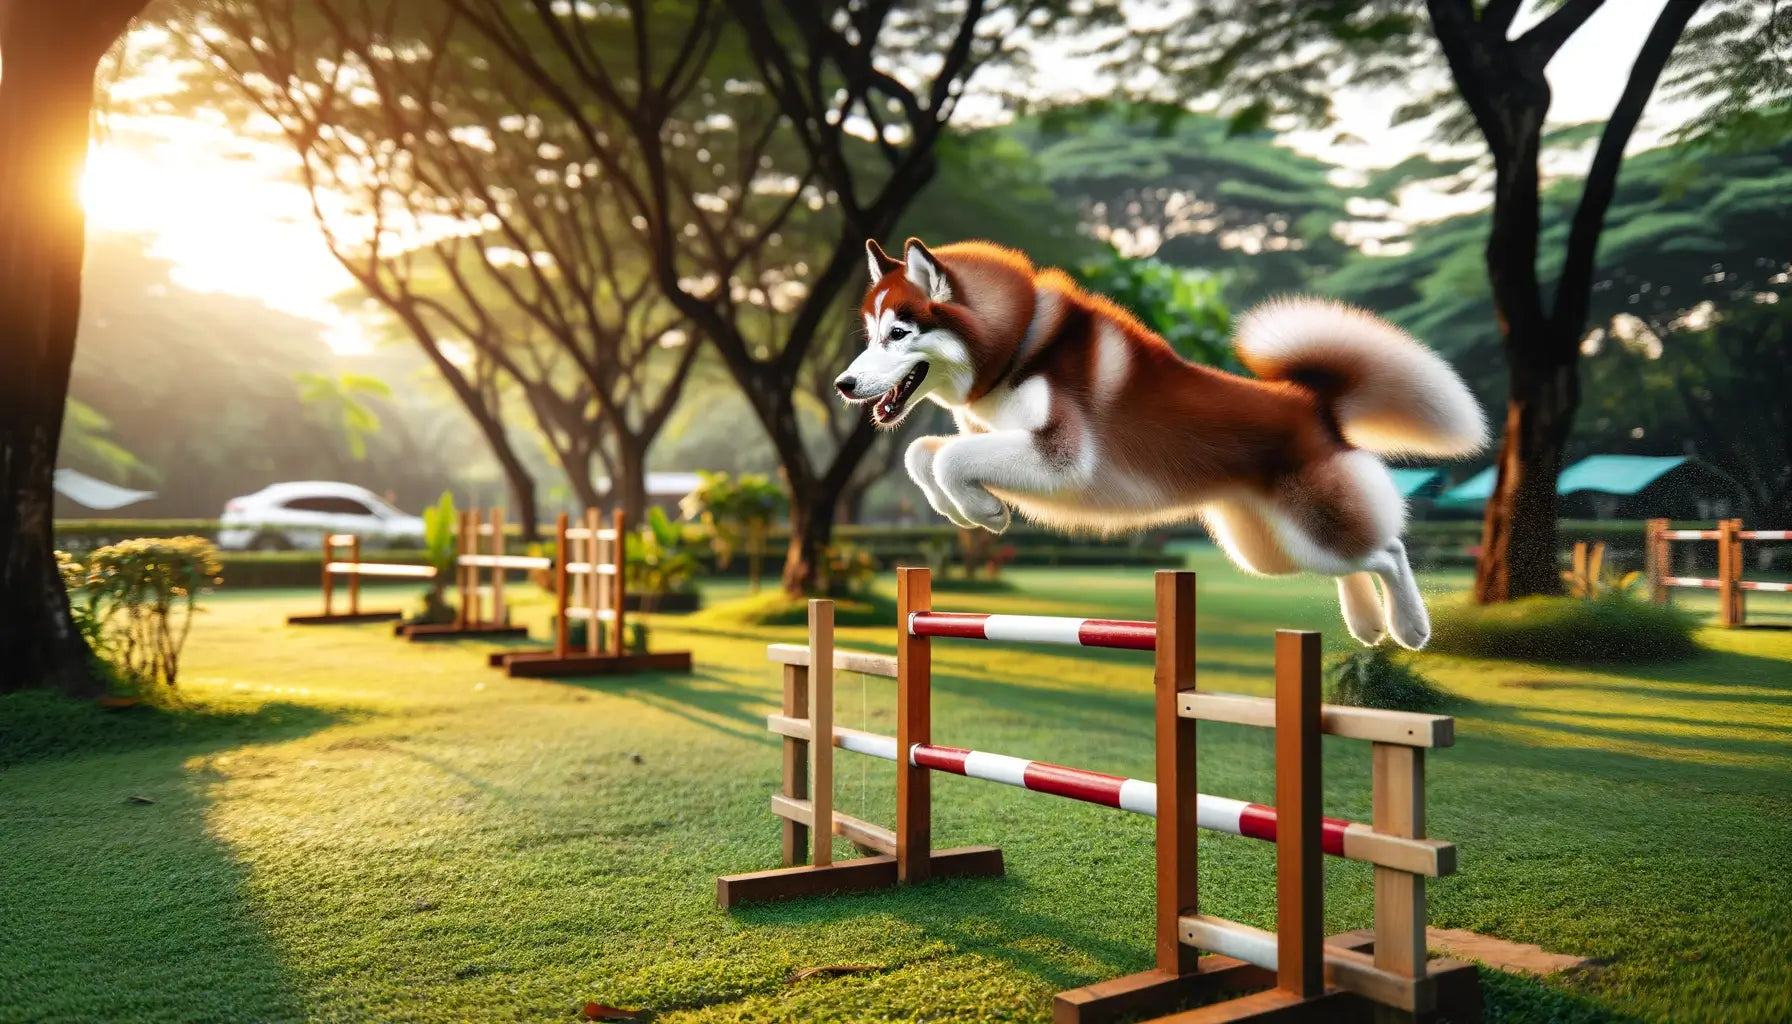 Image showing a Red Husky energetically leaping over a wooden hurdle.